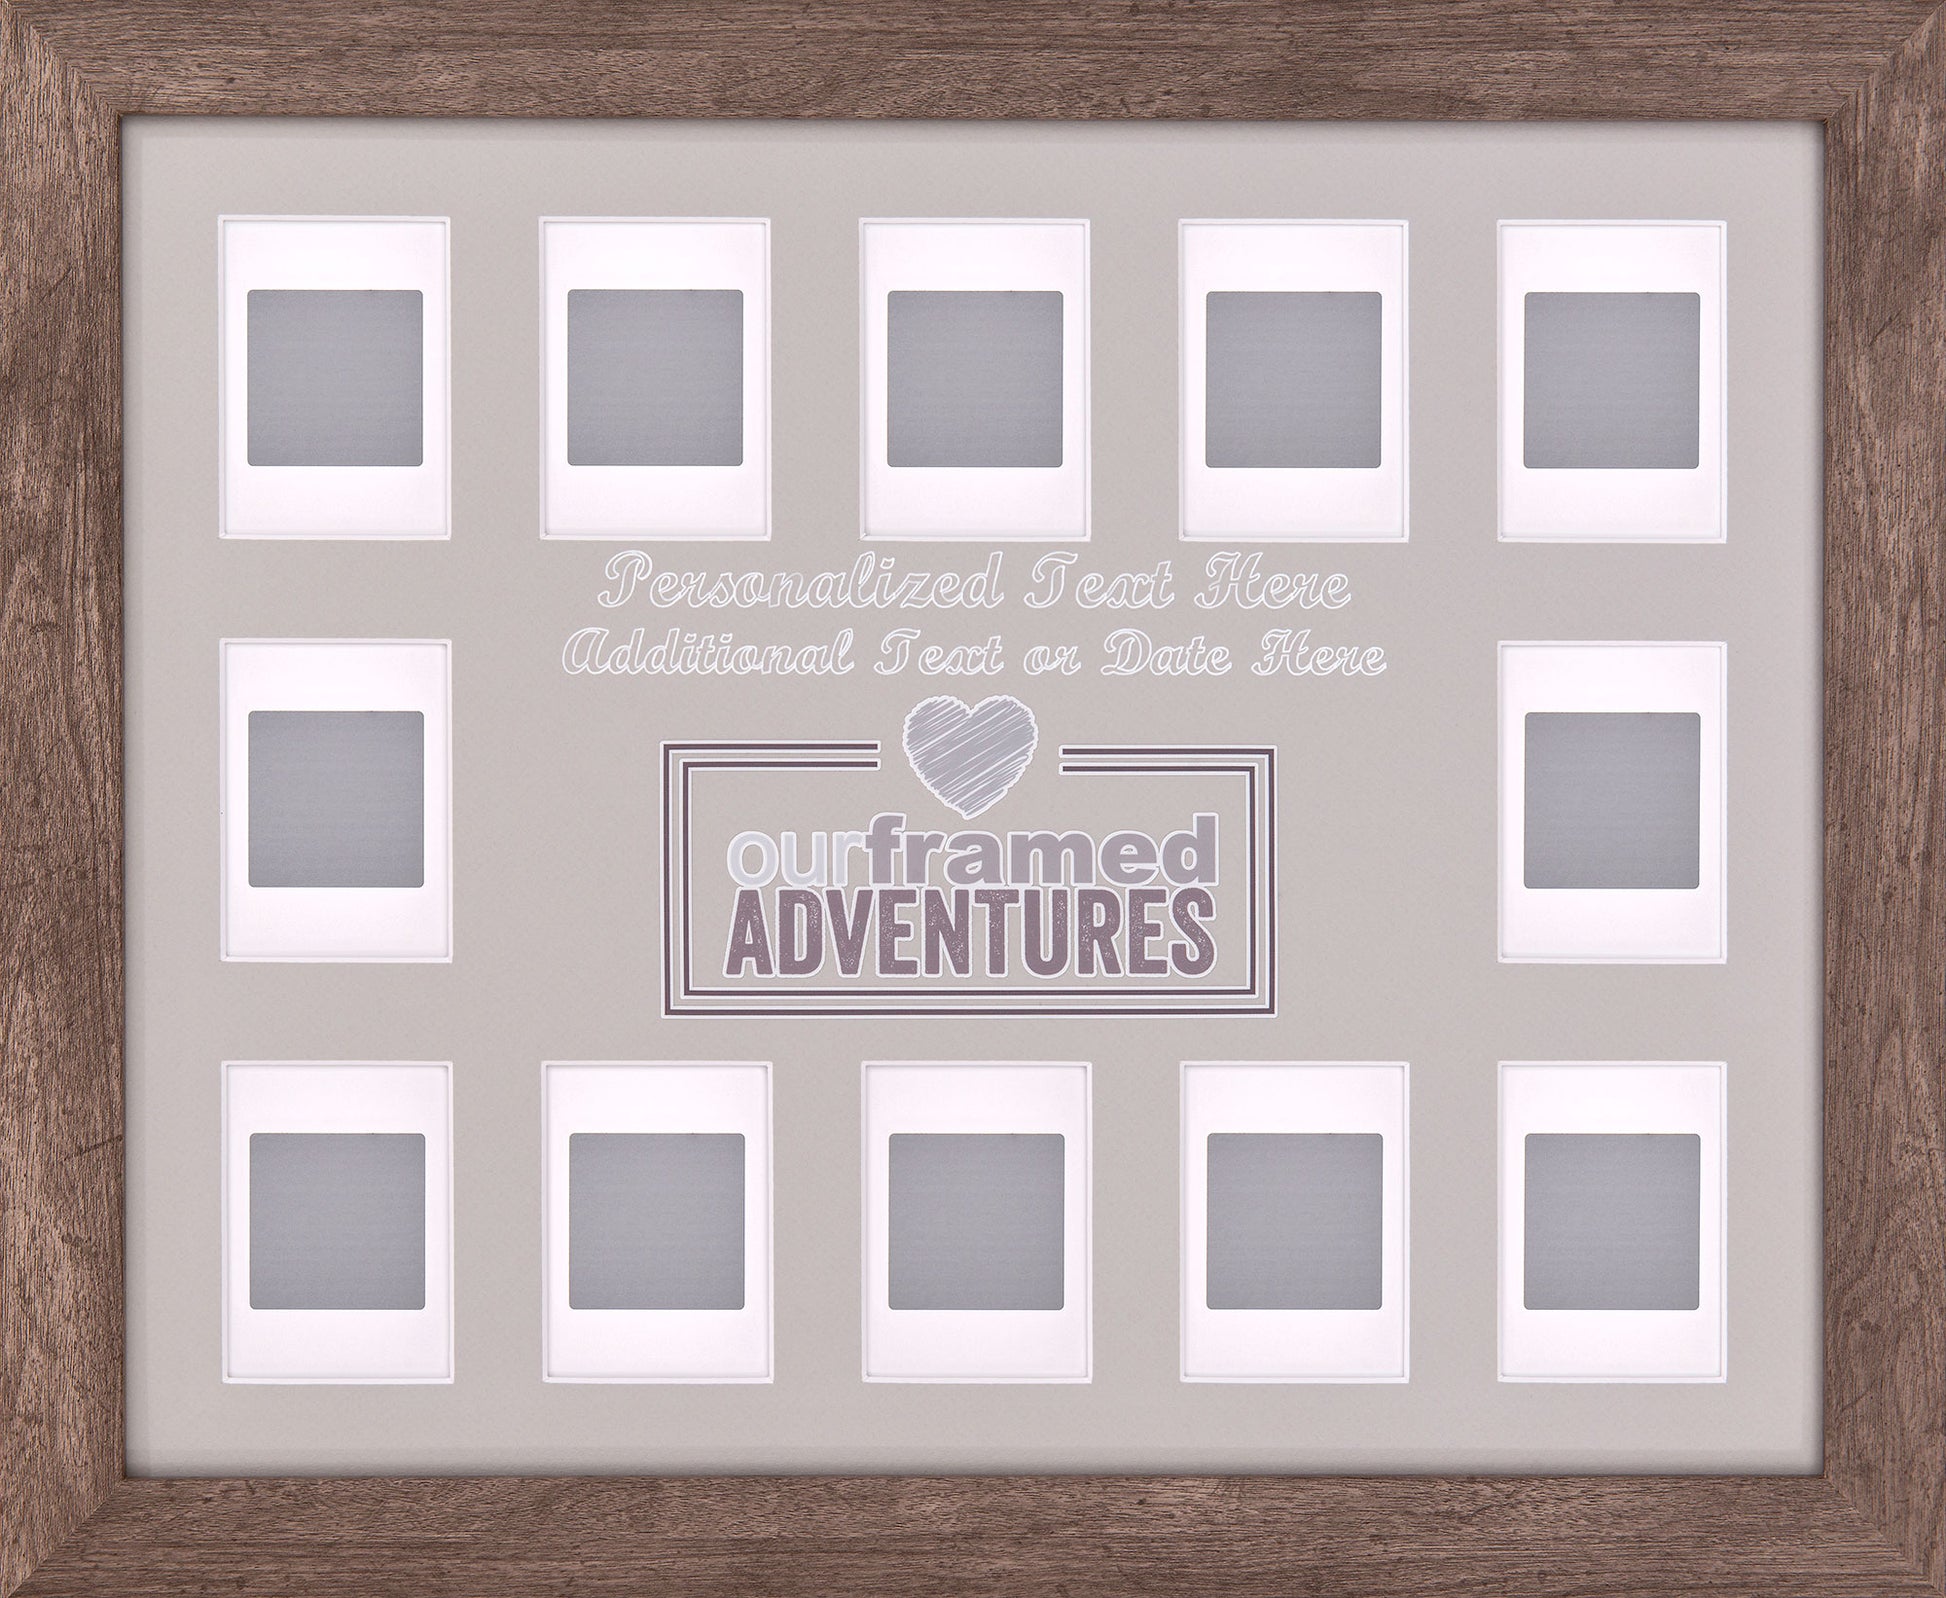 A scratch-off adventure gift for friends, The Adventure Challenge – The  Adventure Challenge